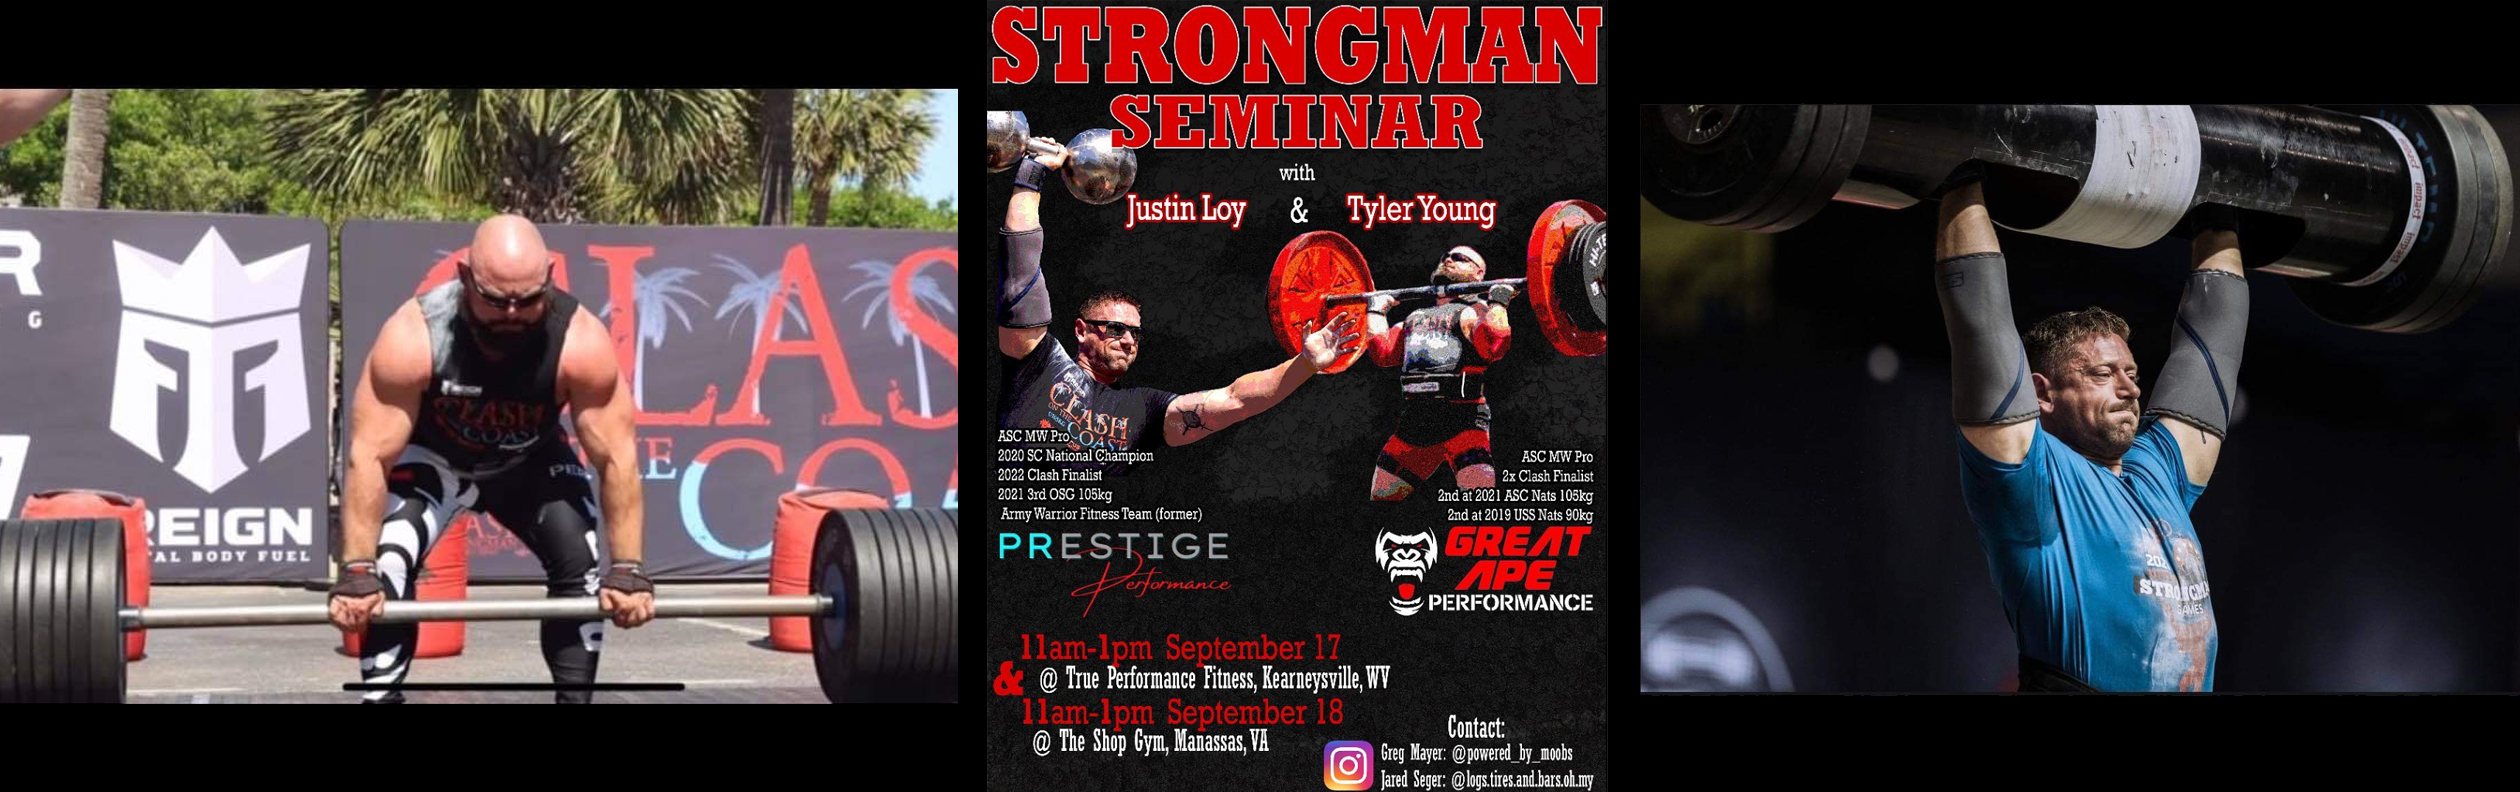 Strongman Seminar, taught by Justin Loy and Tyler Young